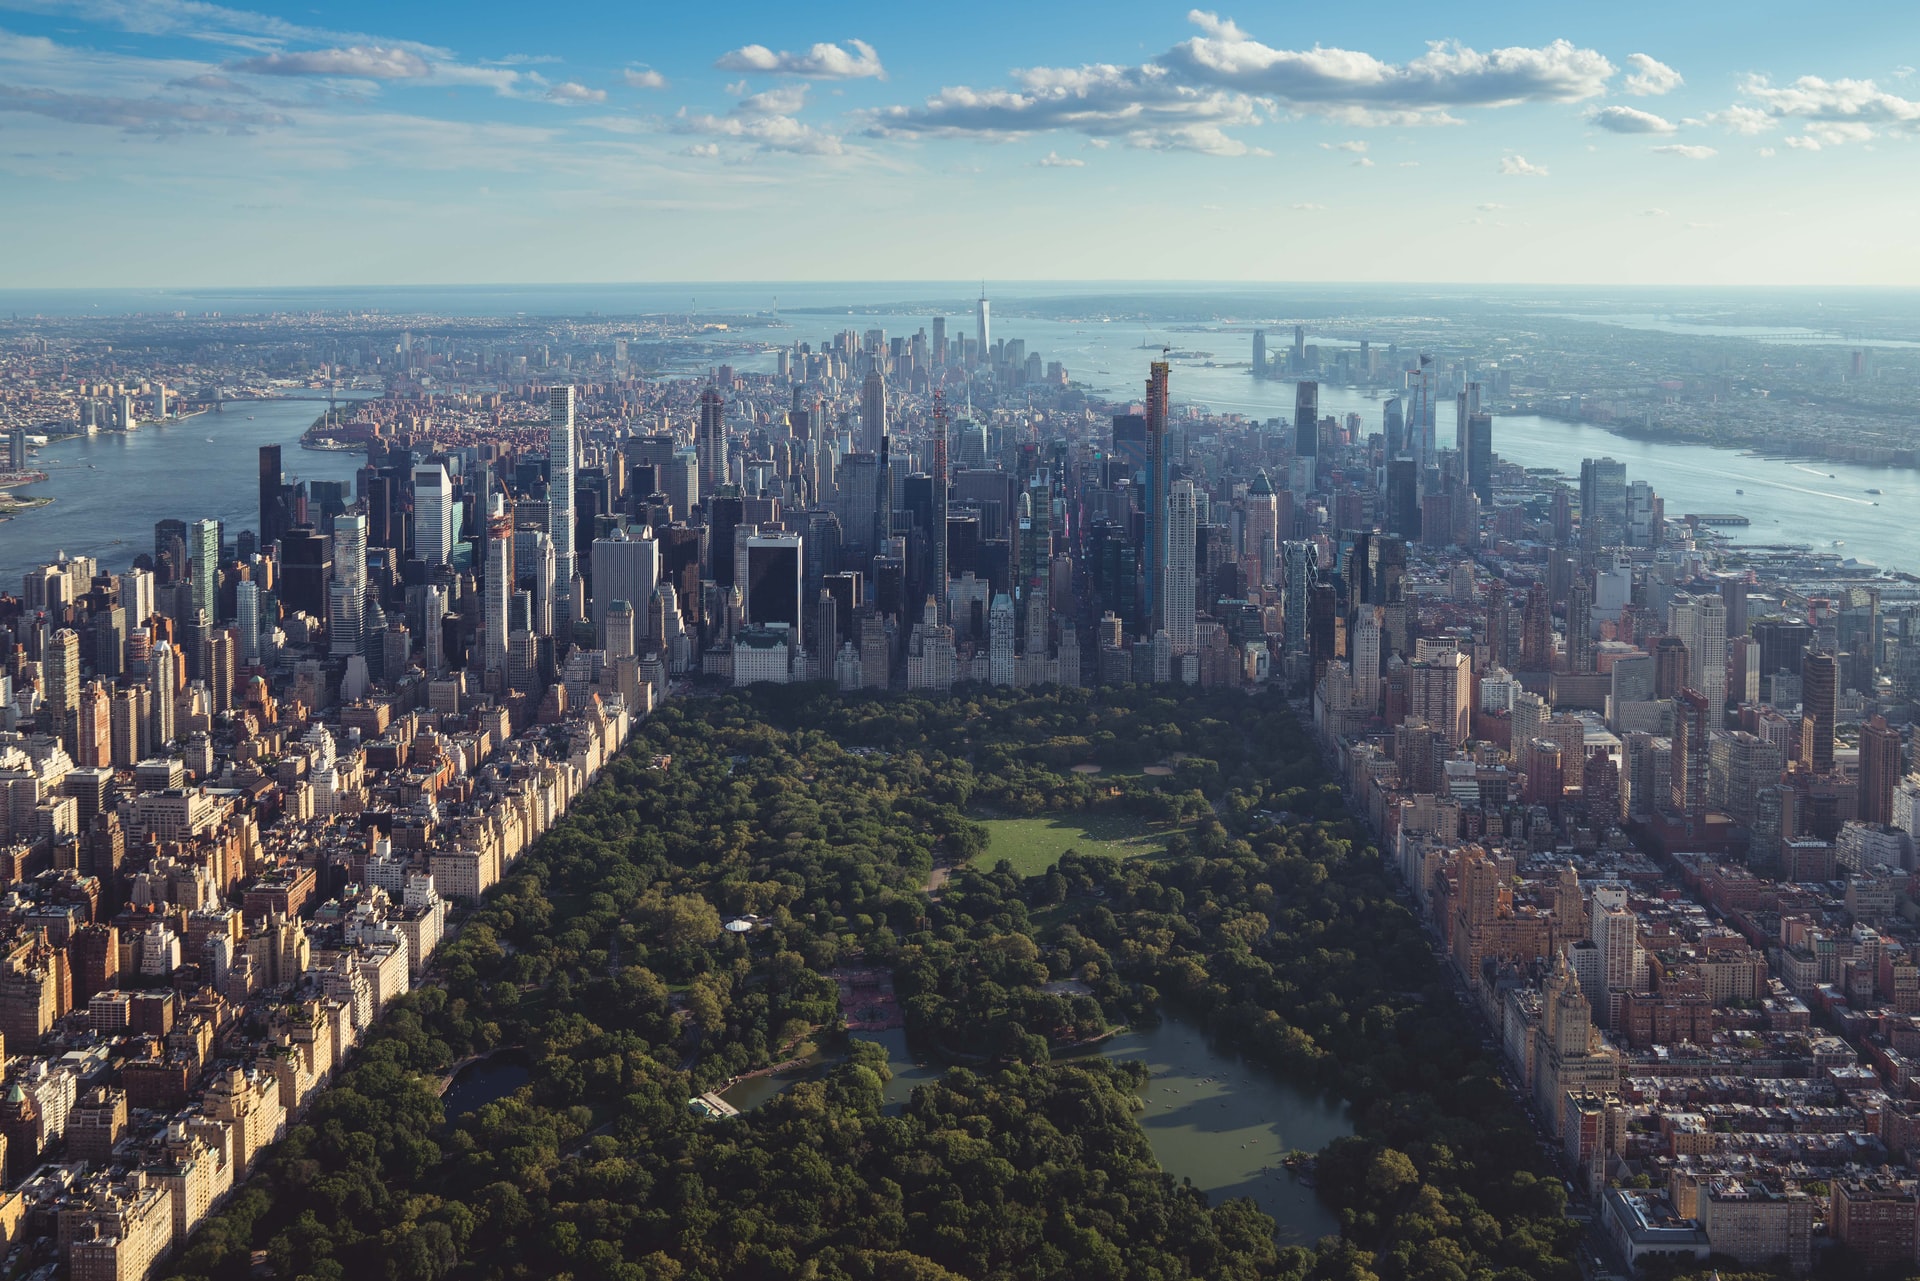 An aerial view of Central Park and New York City.